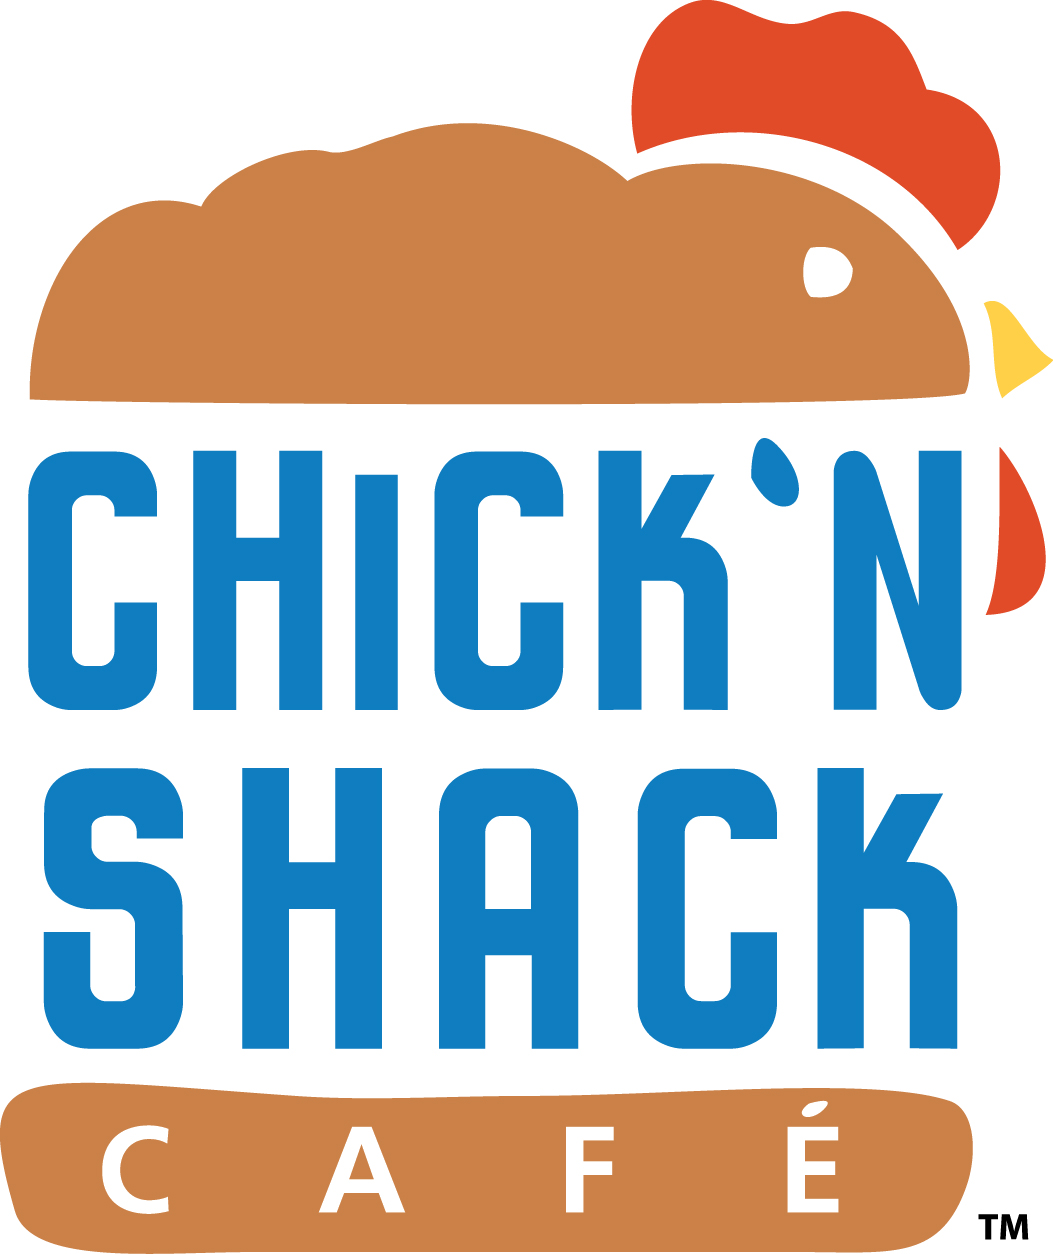 The Chick'n Shack